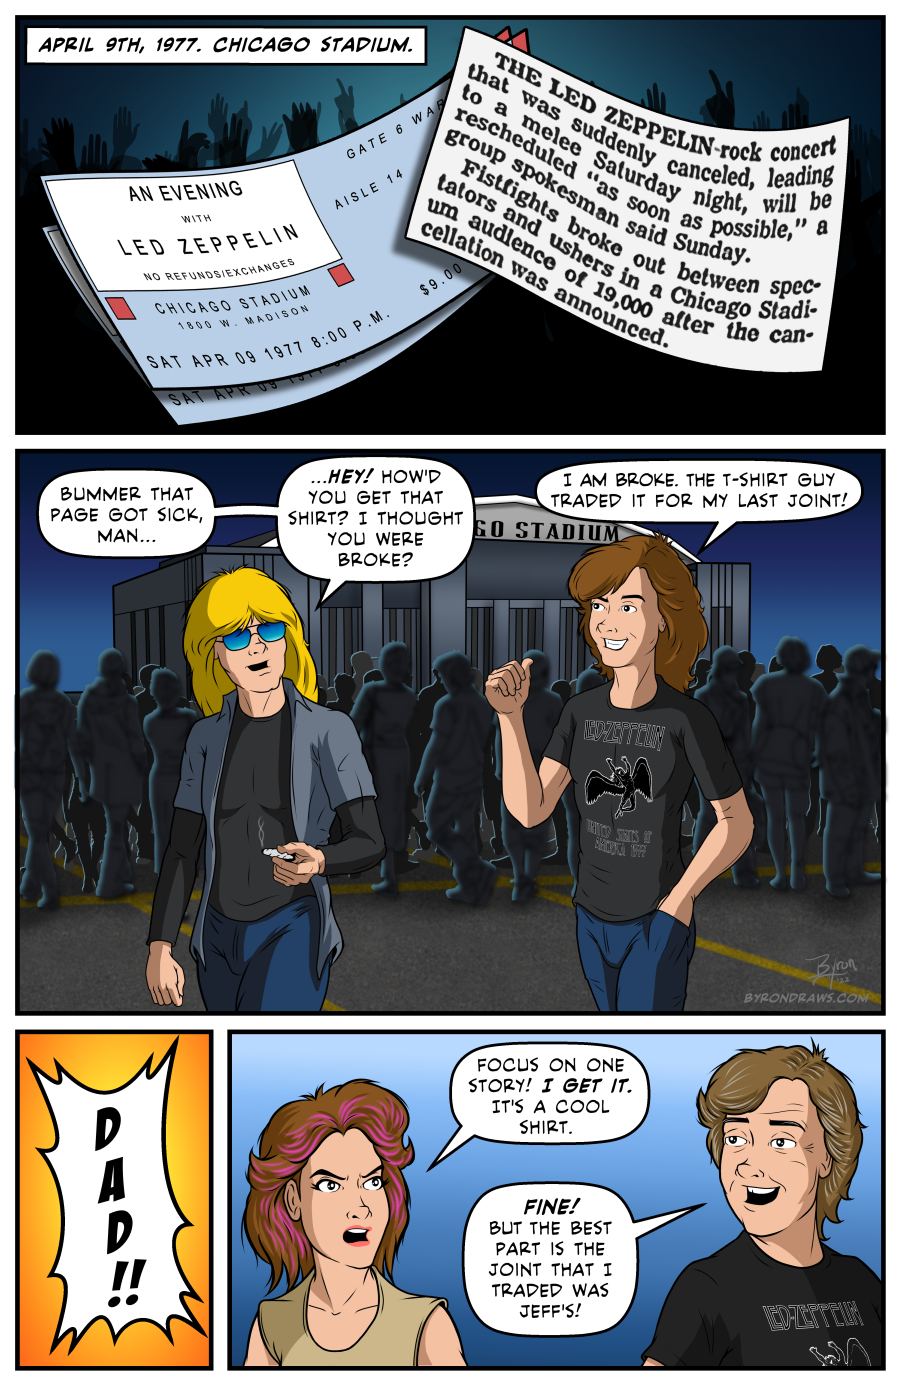 Taking On New York – Page 3